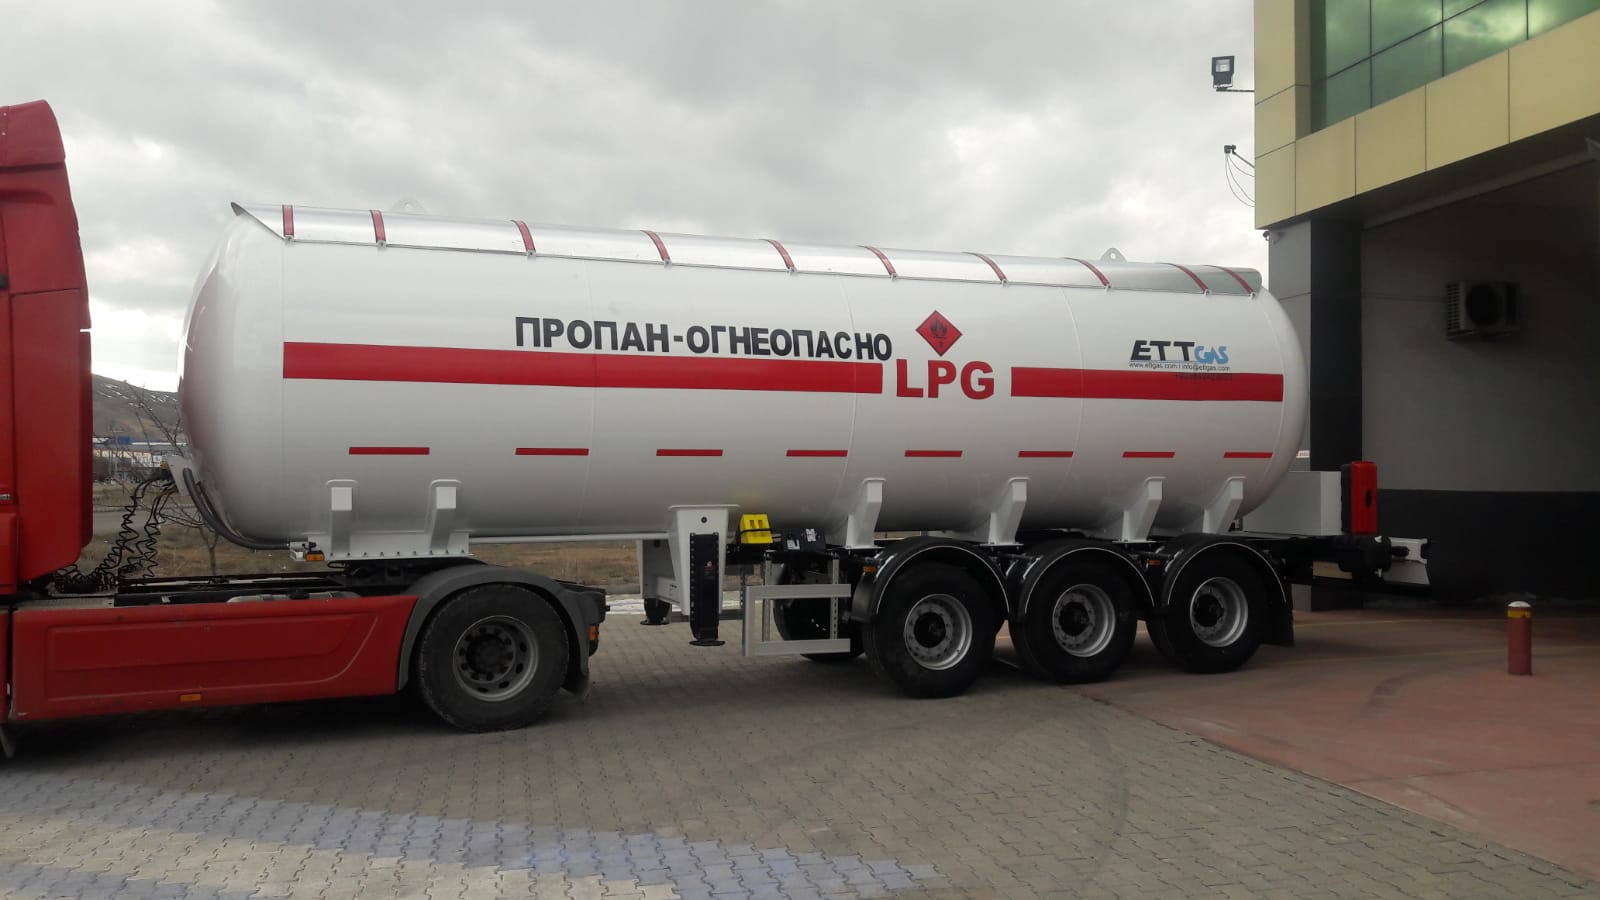 Another 40 m3 Lpg Trailer delivery to Kazakhistan 13.02.2019